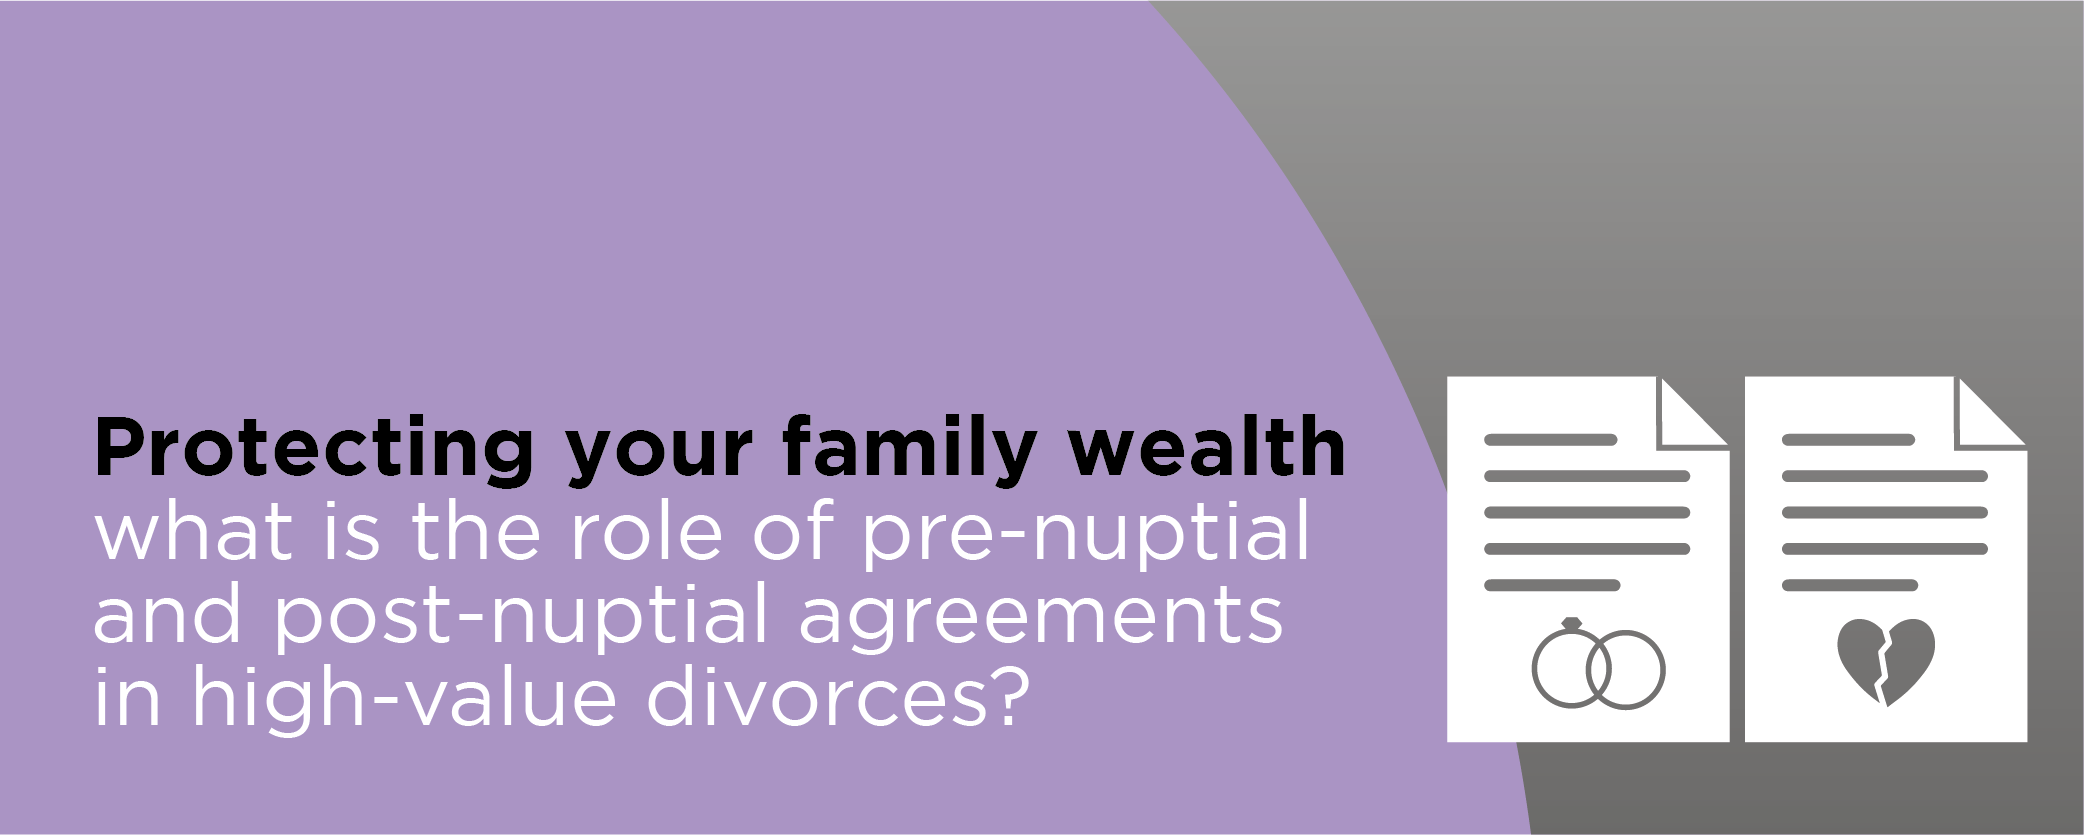 What is the role of pre-nuptial and post-nuptial agreements in high-value divorces?